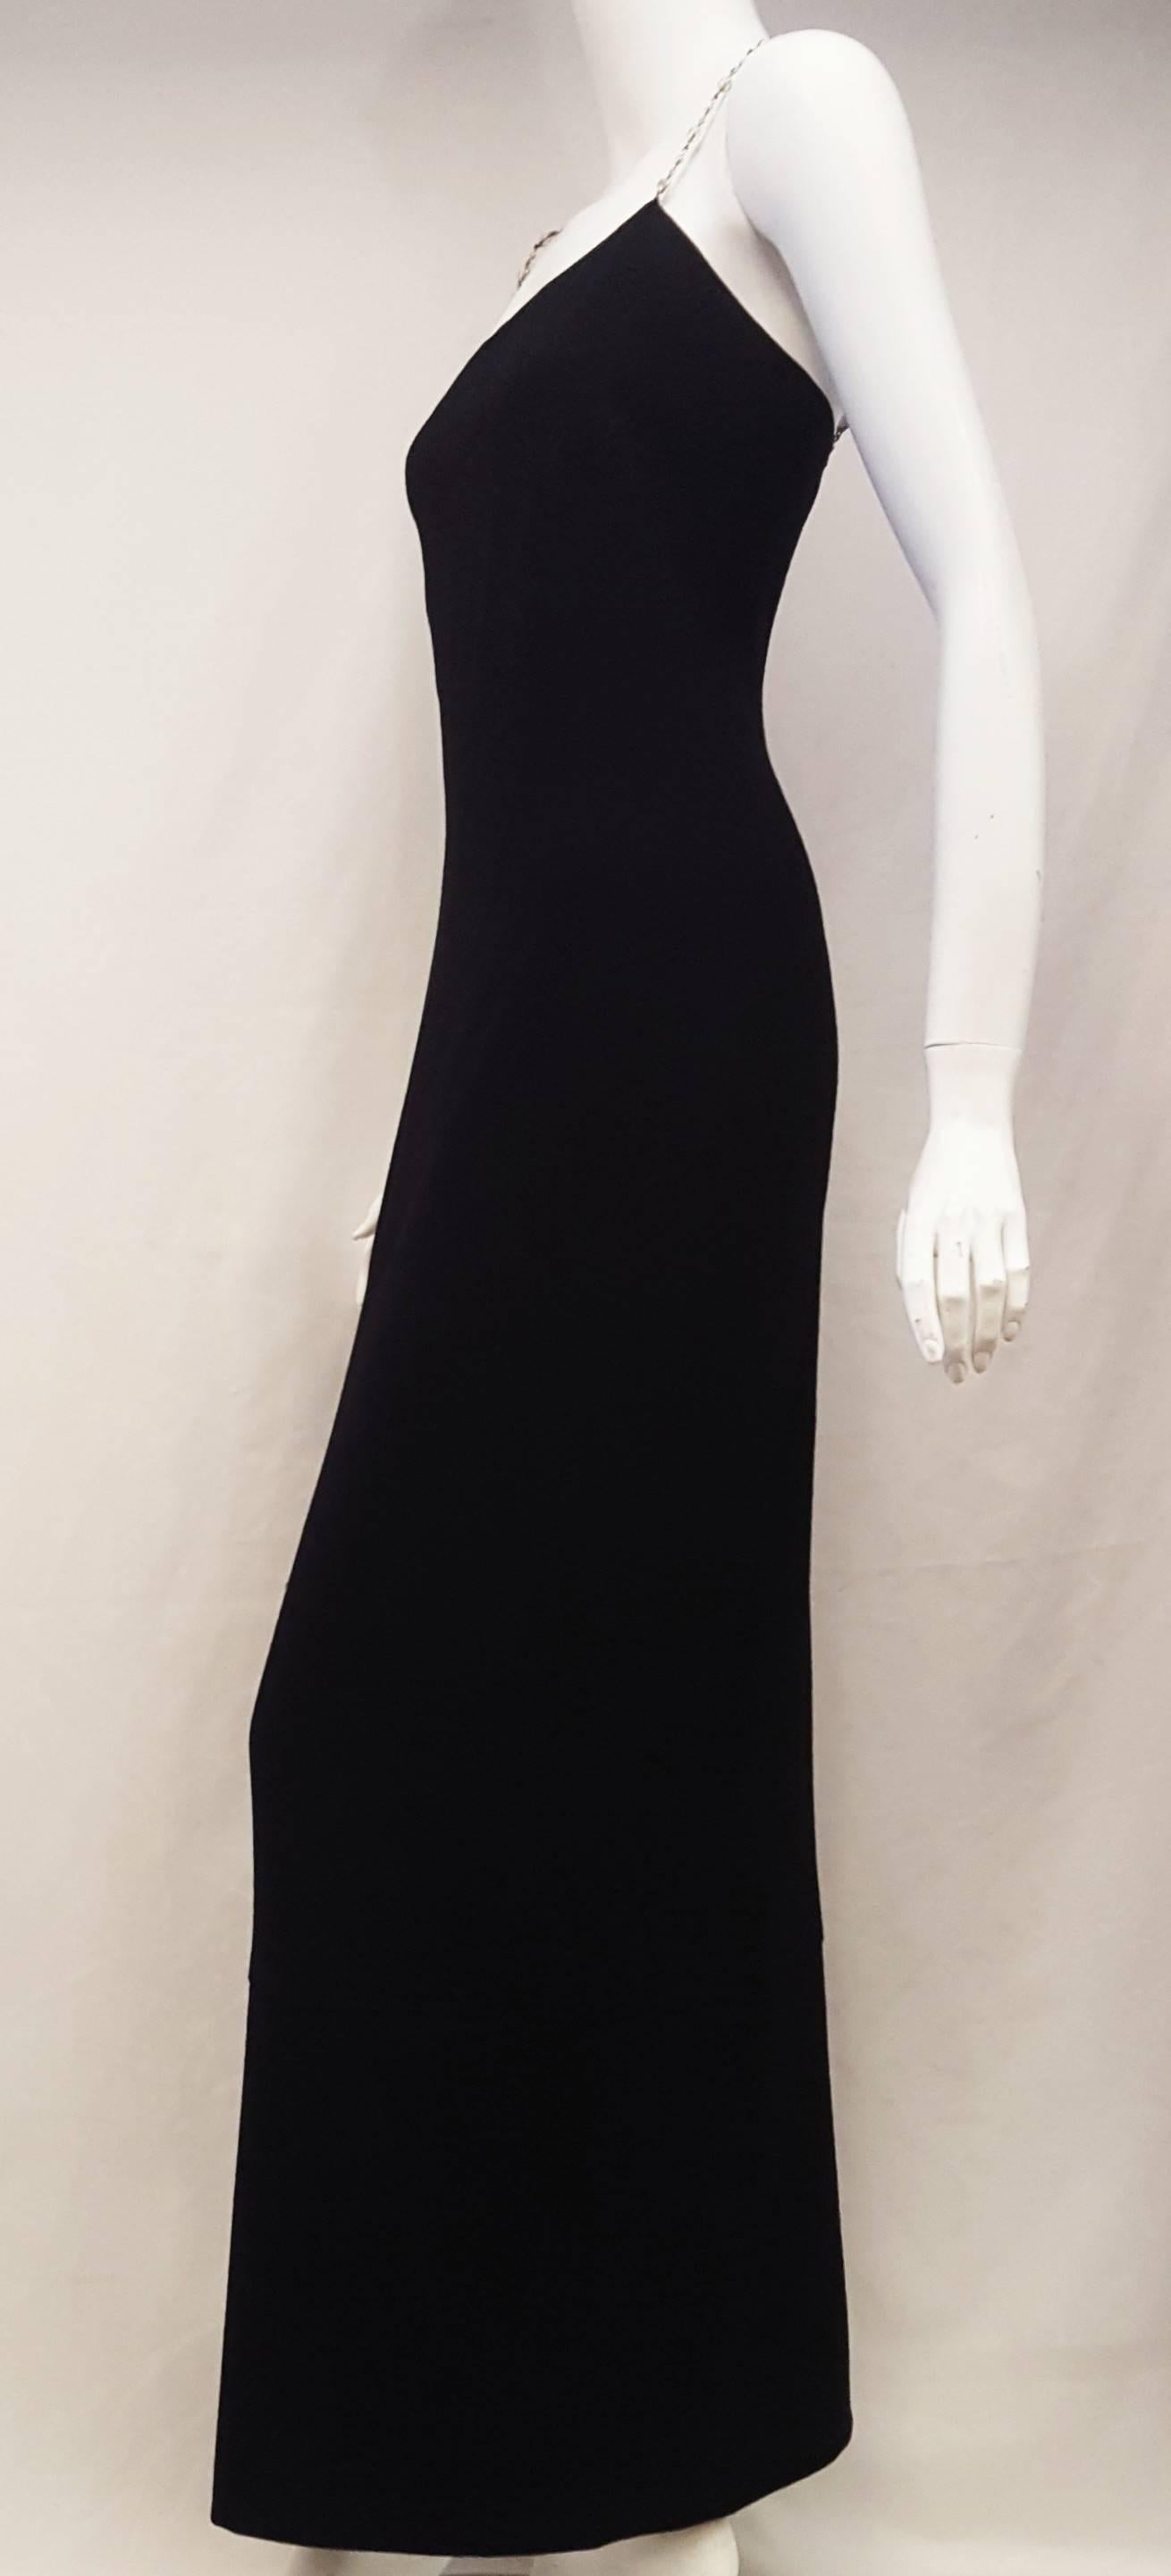 Chanel black wool dress with crystal gripoix straps long dress makes a statement for many occasions!  It will stand out much more than your typical LBD.  The gripoix crystal is set in an elegant yet sturdy silver tone chain.  The hidden zipper is